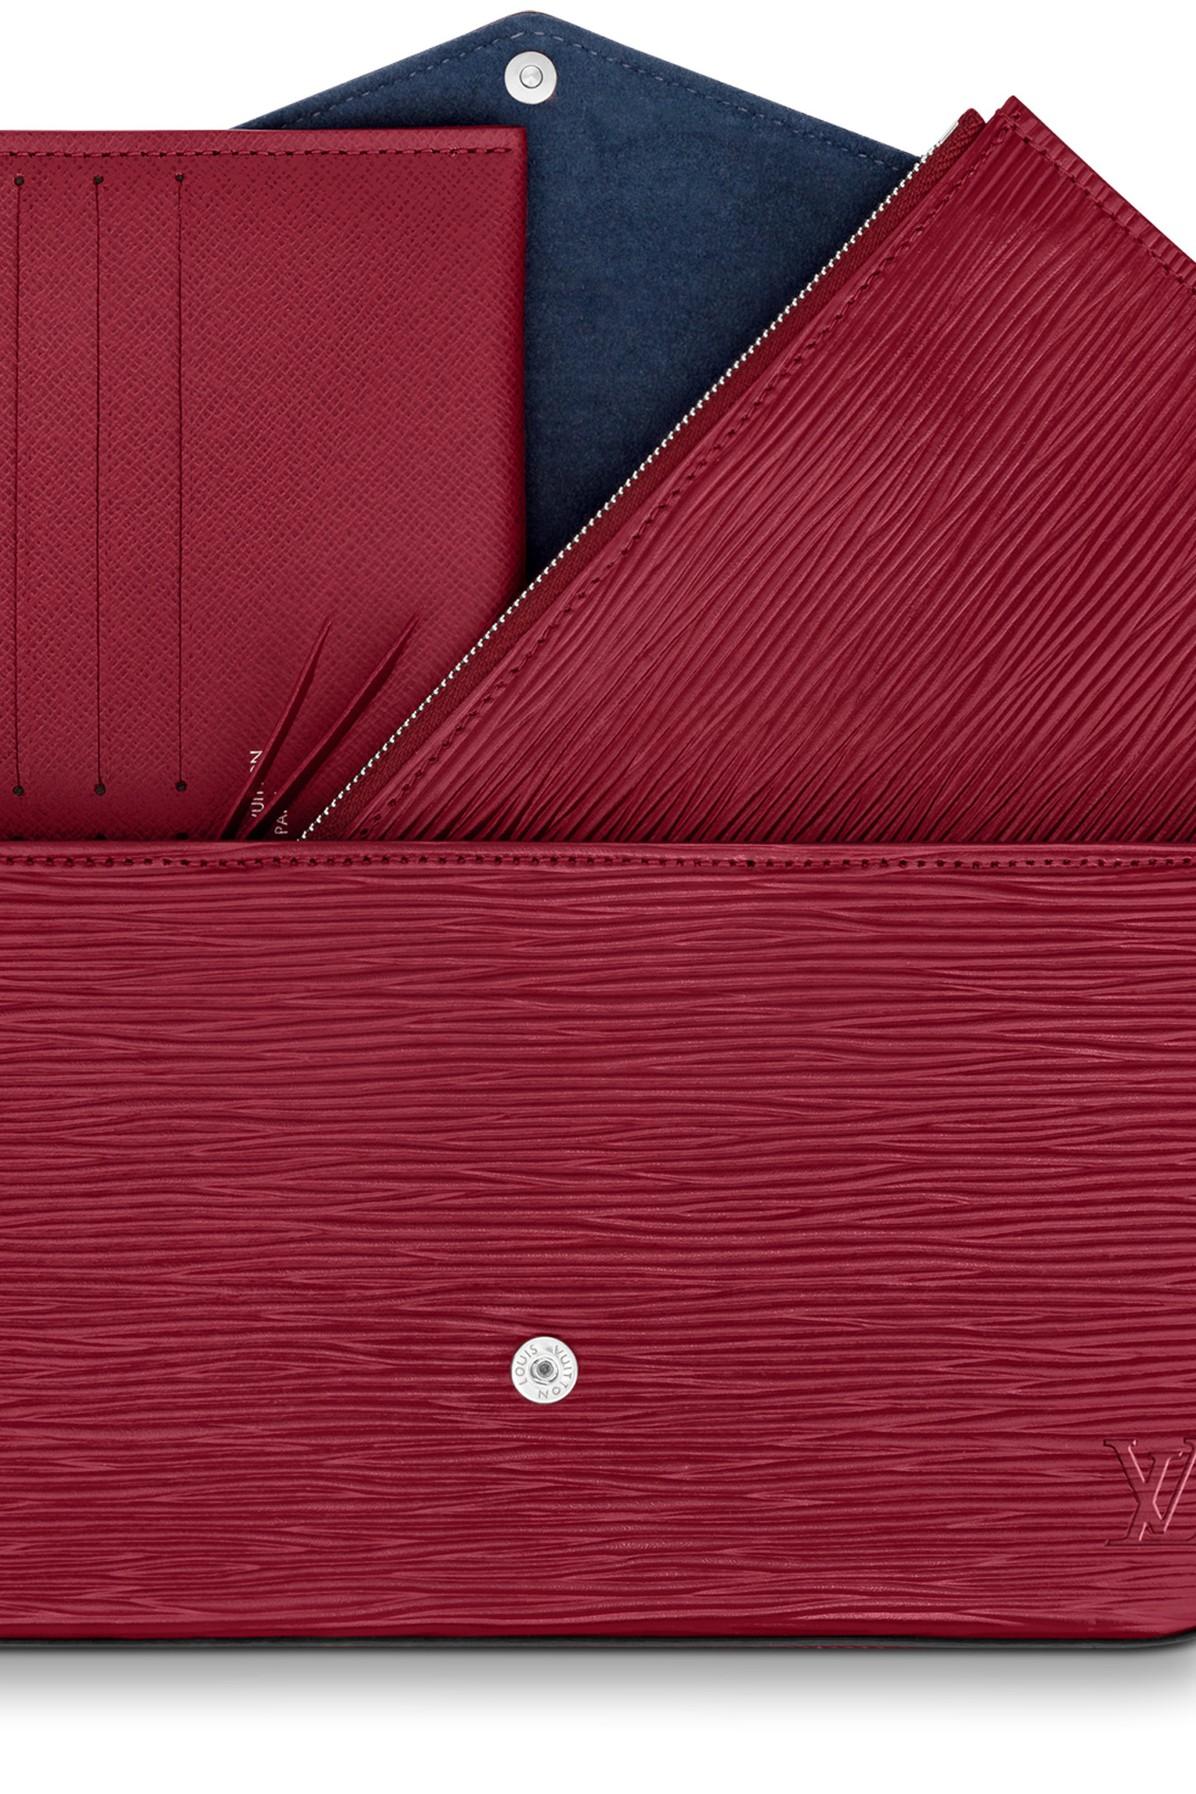 Pre-owned Louis Vuitton Pochette Felicie Card Holder Insert Red